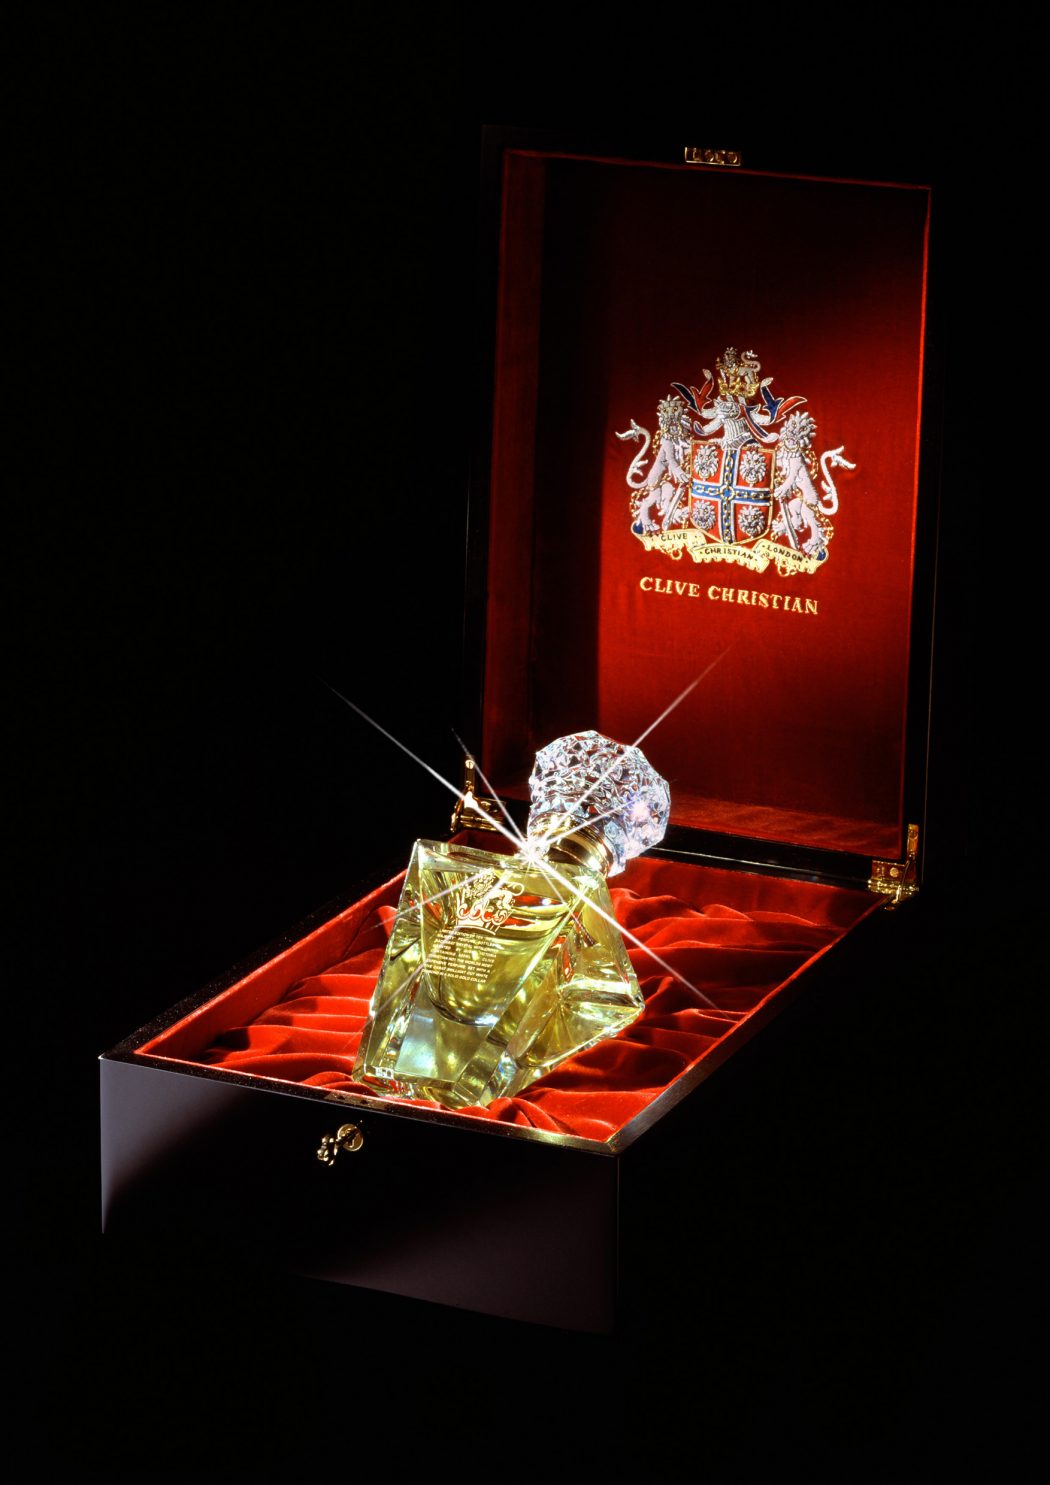 clive christian no 1 perfume imperial majesty edition